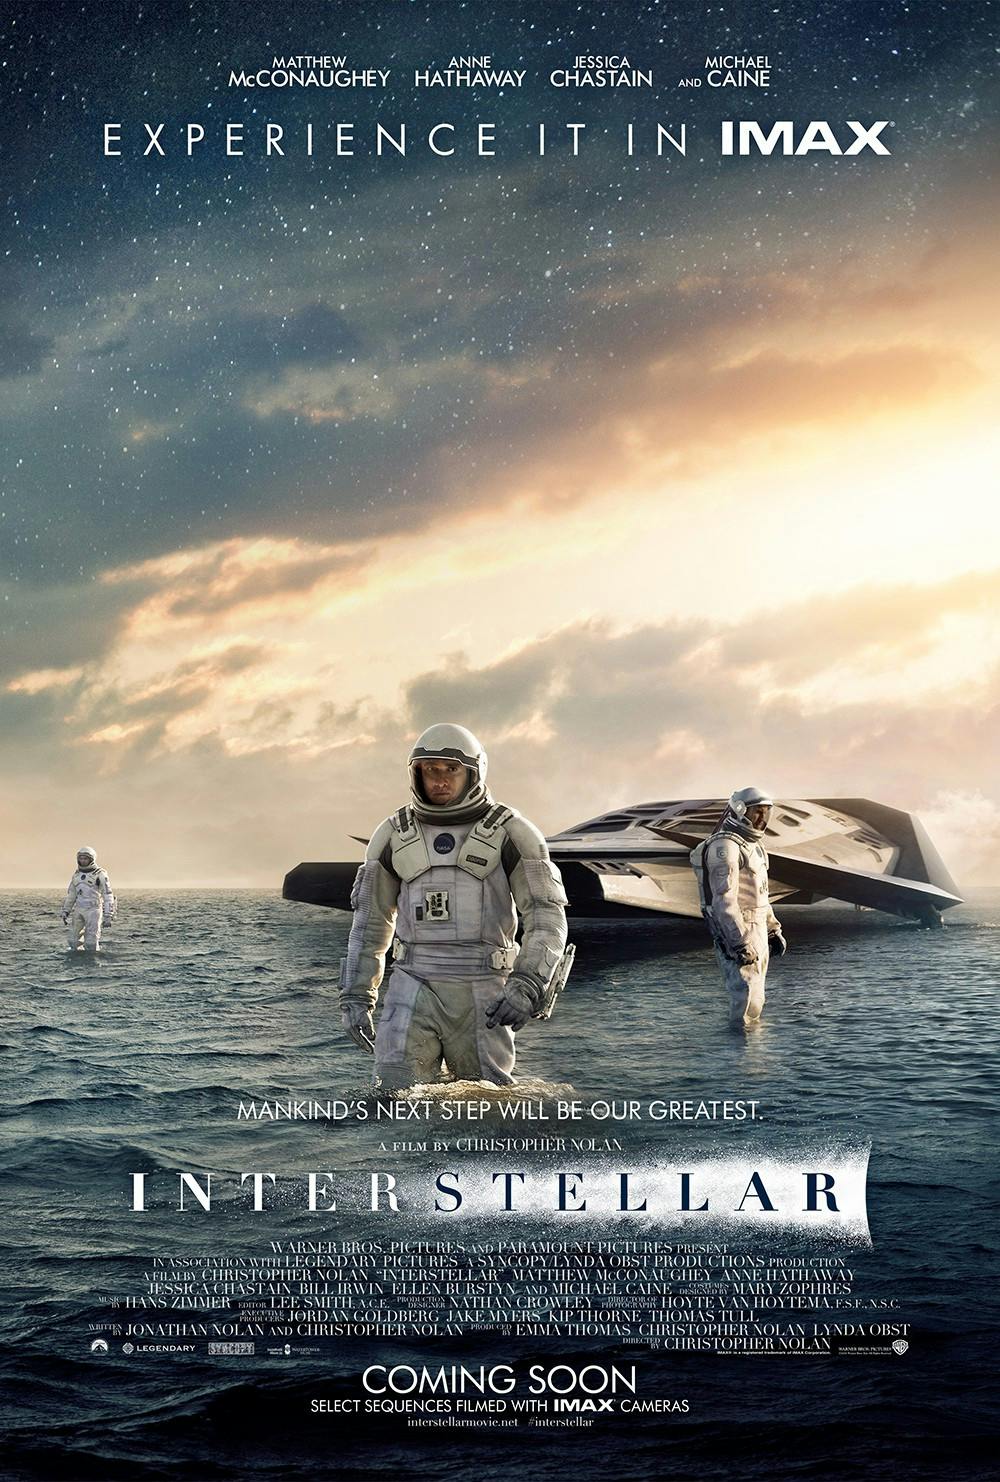 Opinion: 'Interstellar' fans should check out these options